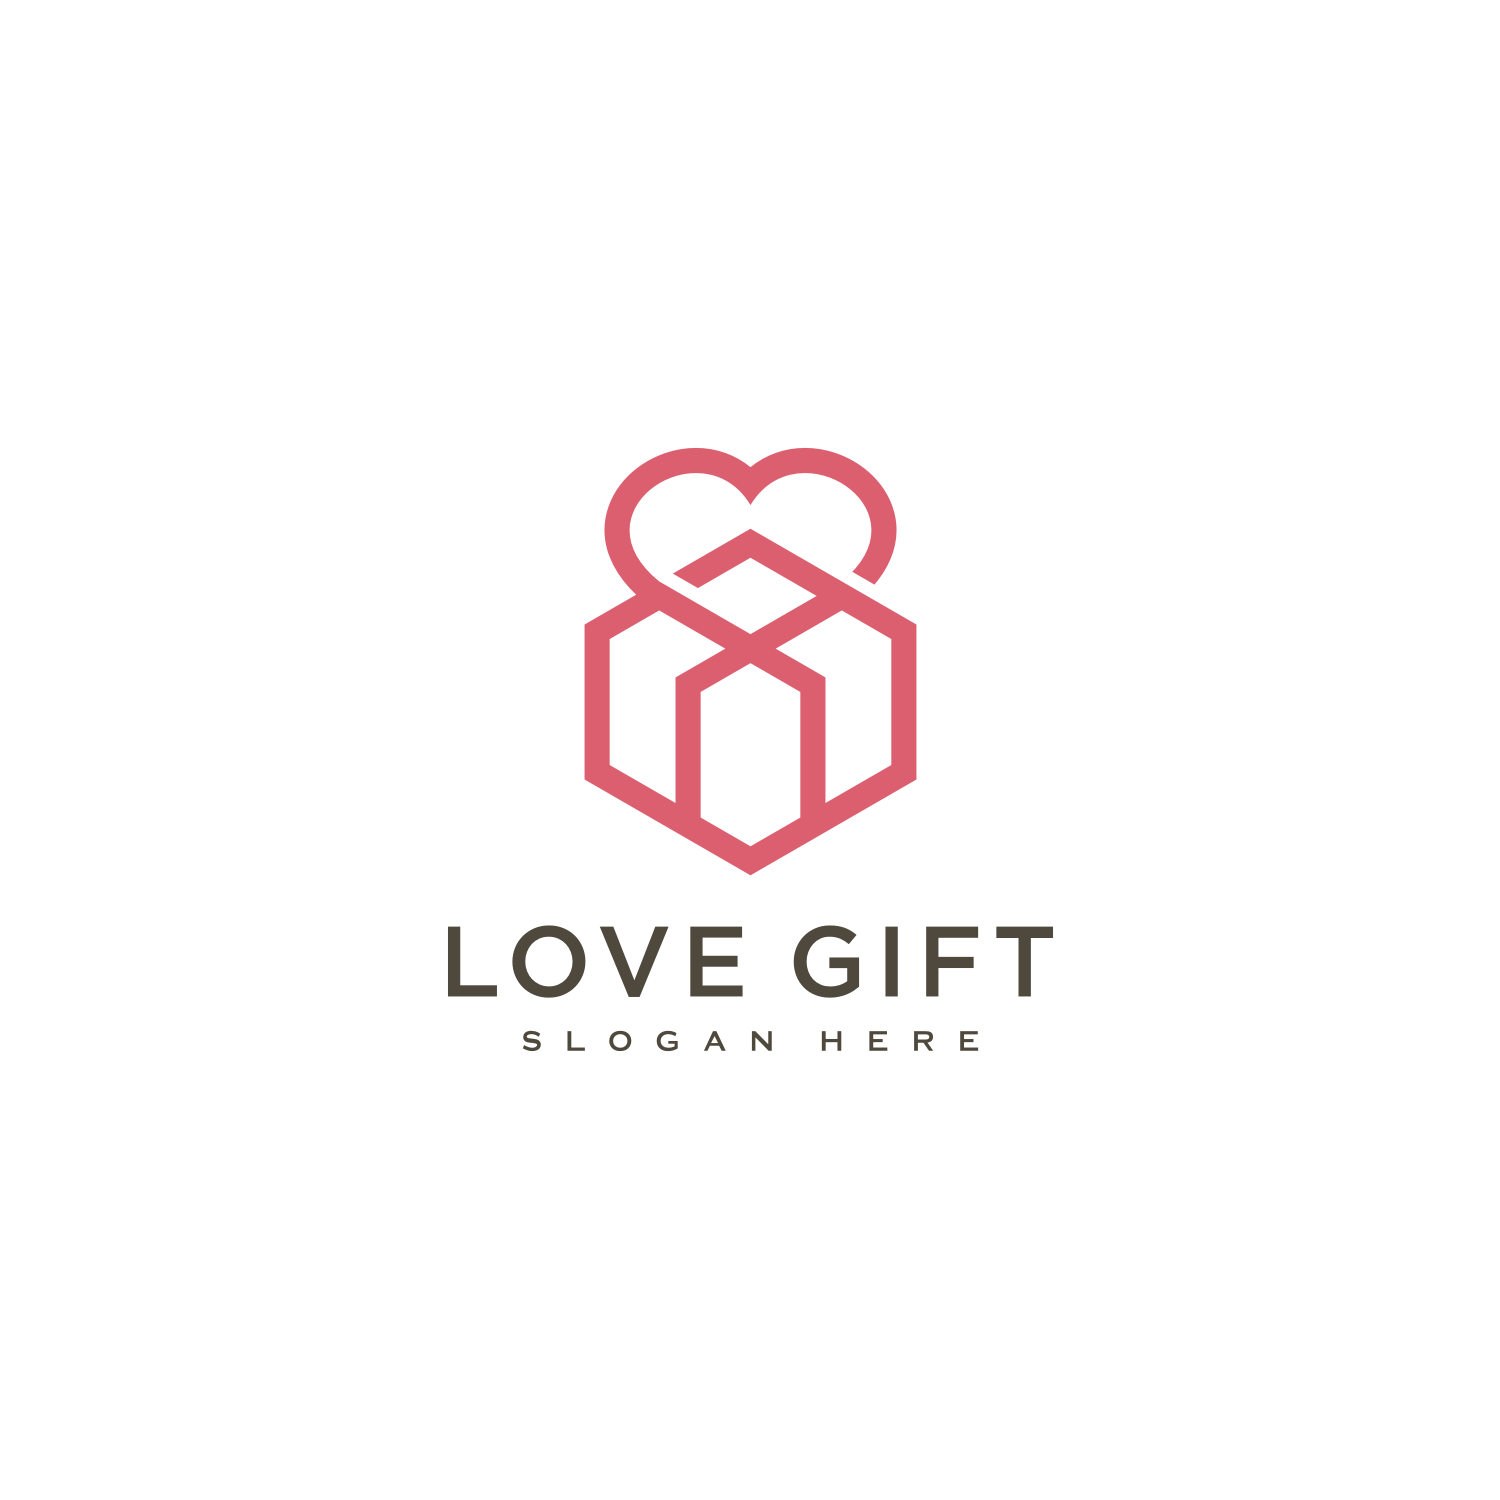 Love Gift Logo Vector Line Style cover image.